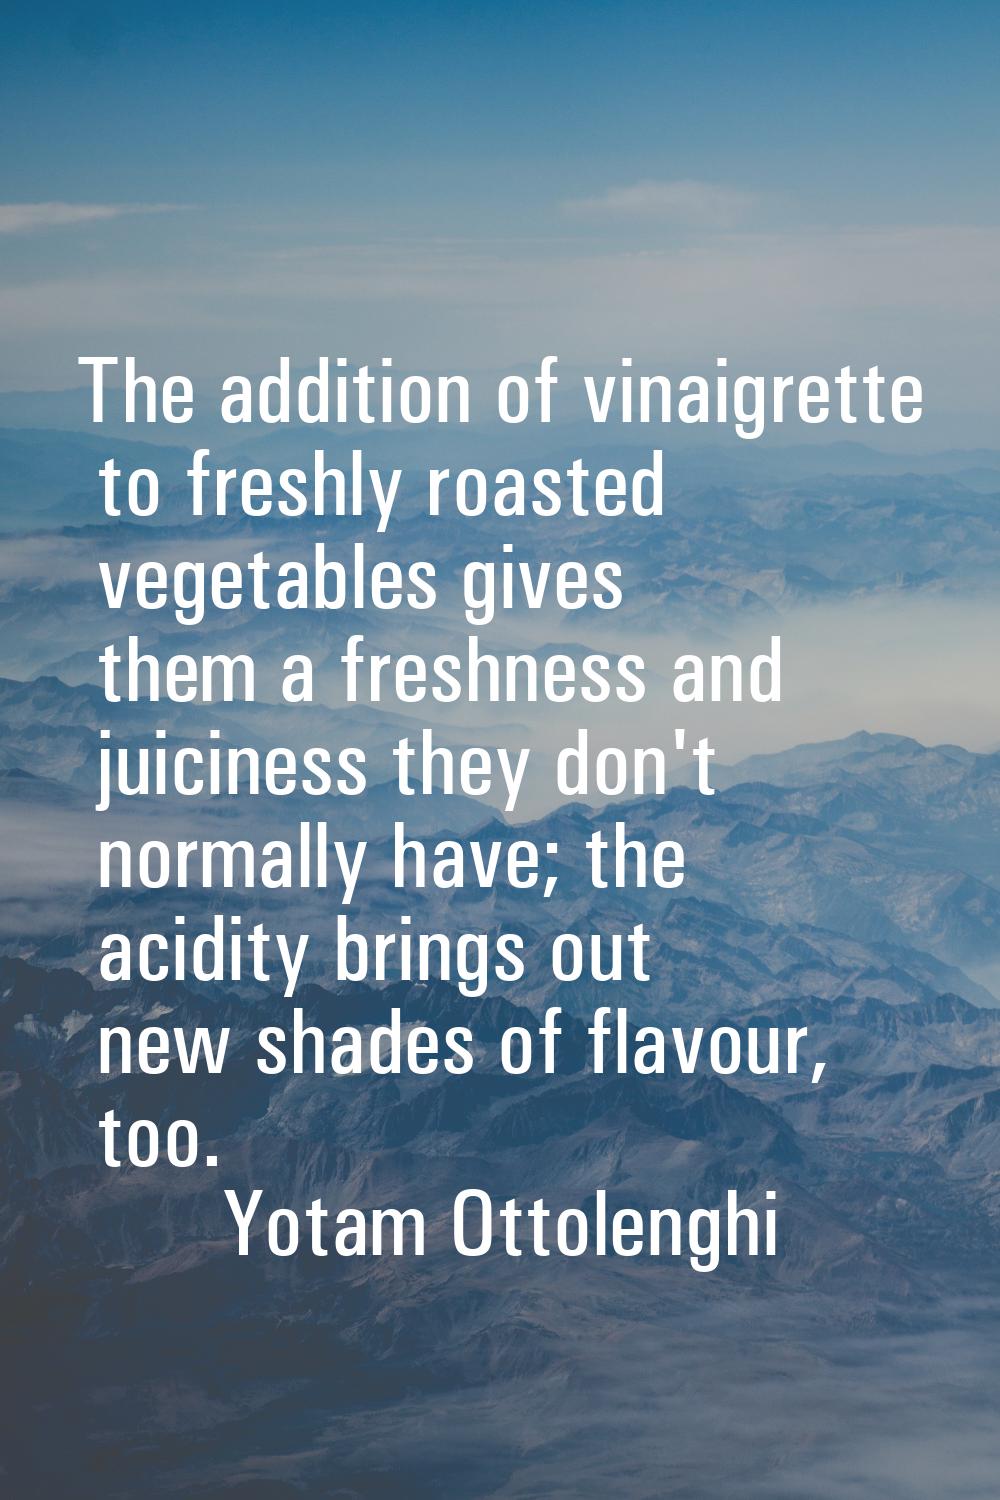 The addition of vinaigrette to freshly roasted vegetables gives them a freshness and juiciness they